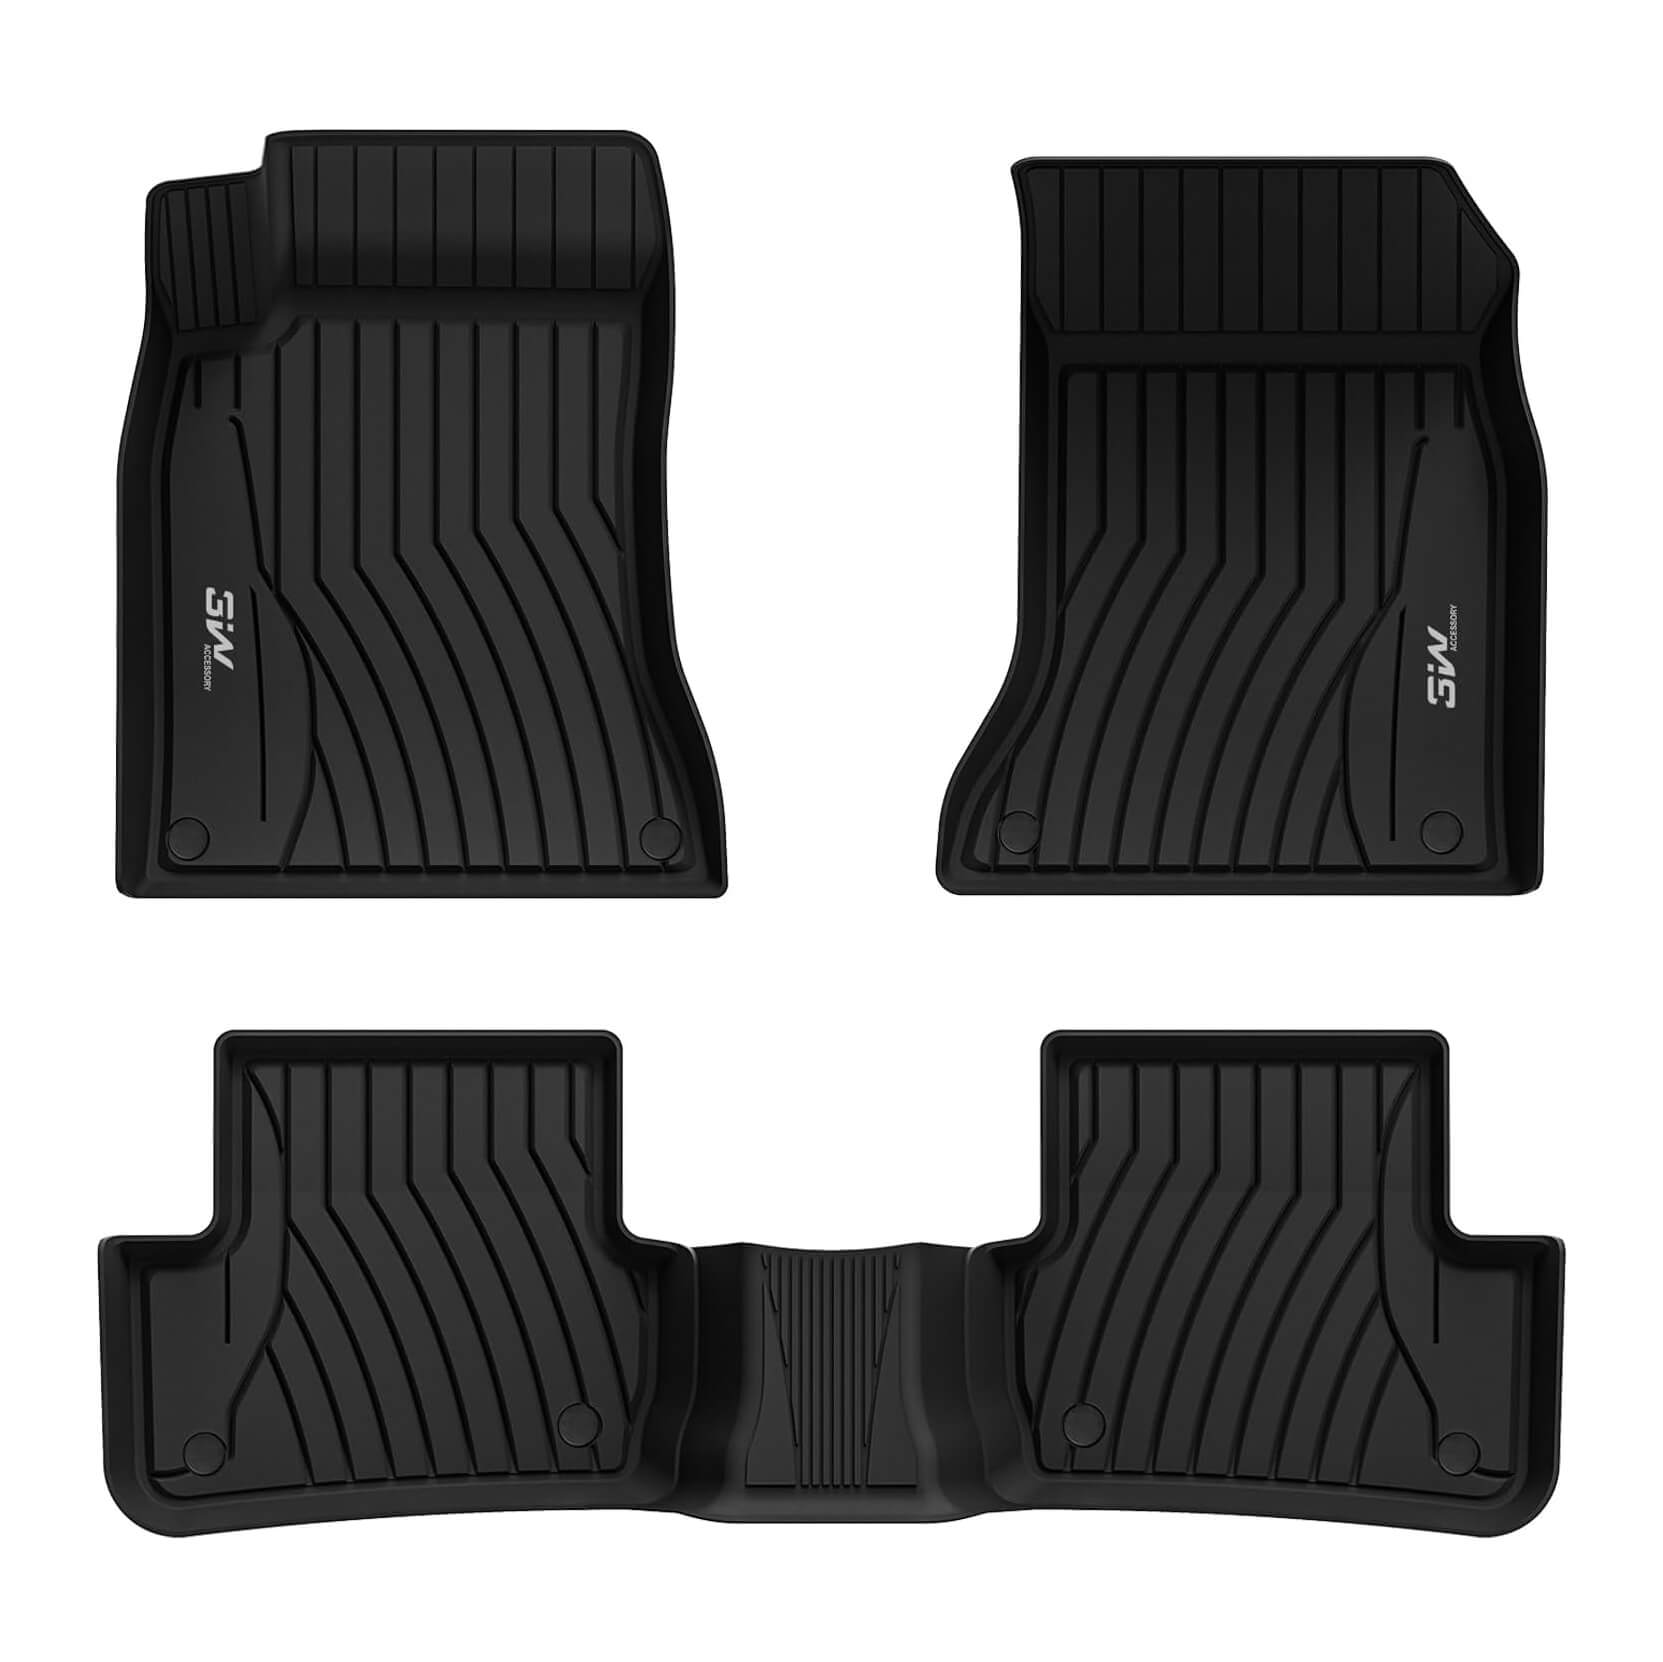 3W Mercedes-Benz GLA 2021-2023 Custom Floor Mats TPE Material & All-Weather Protection Vehicles & Parts 3Wliners 2021-2023 GLA 2021-2023 1st&2nd Row Mats